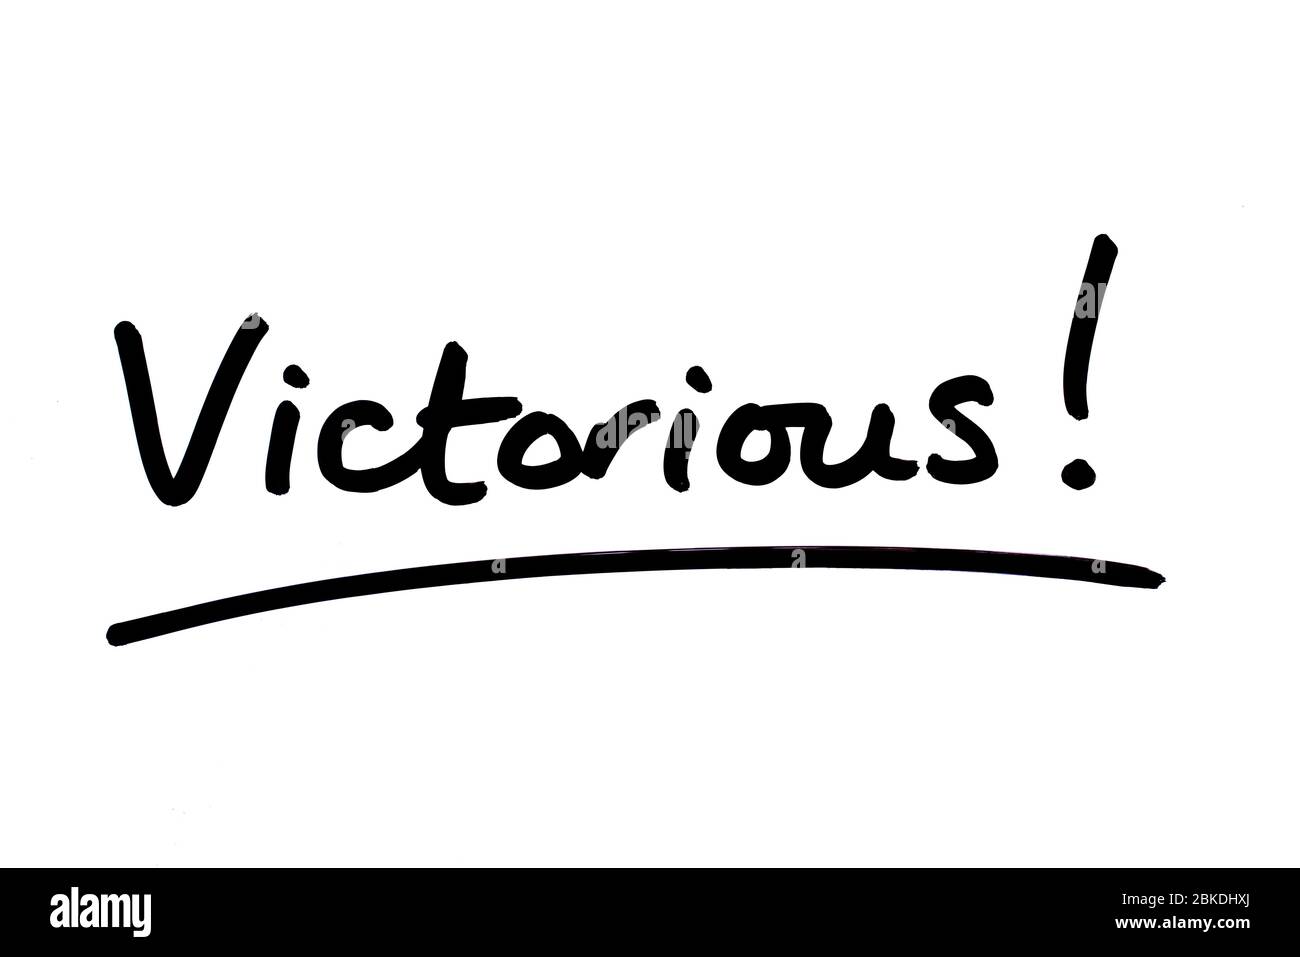 Victorious! handwritten on a white background. Stock Photo